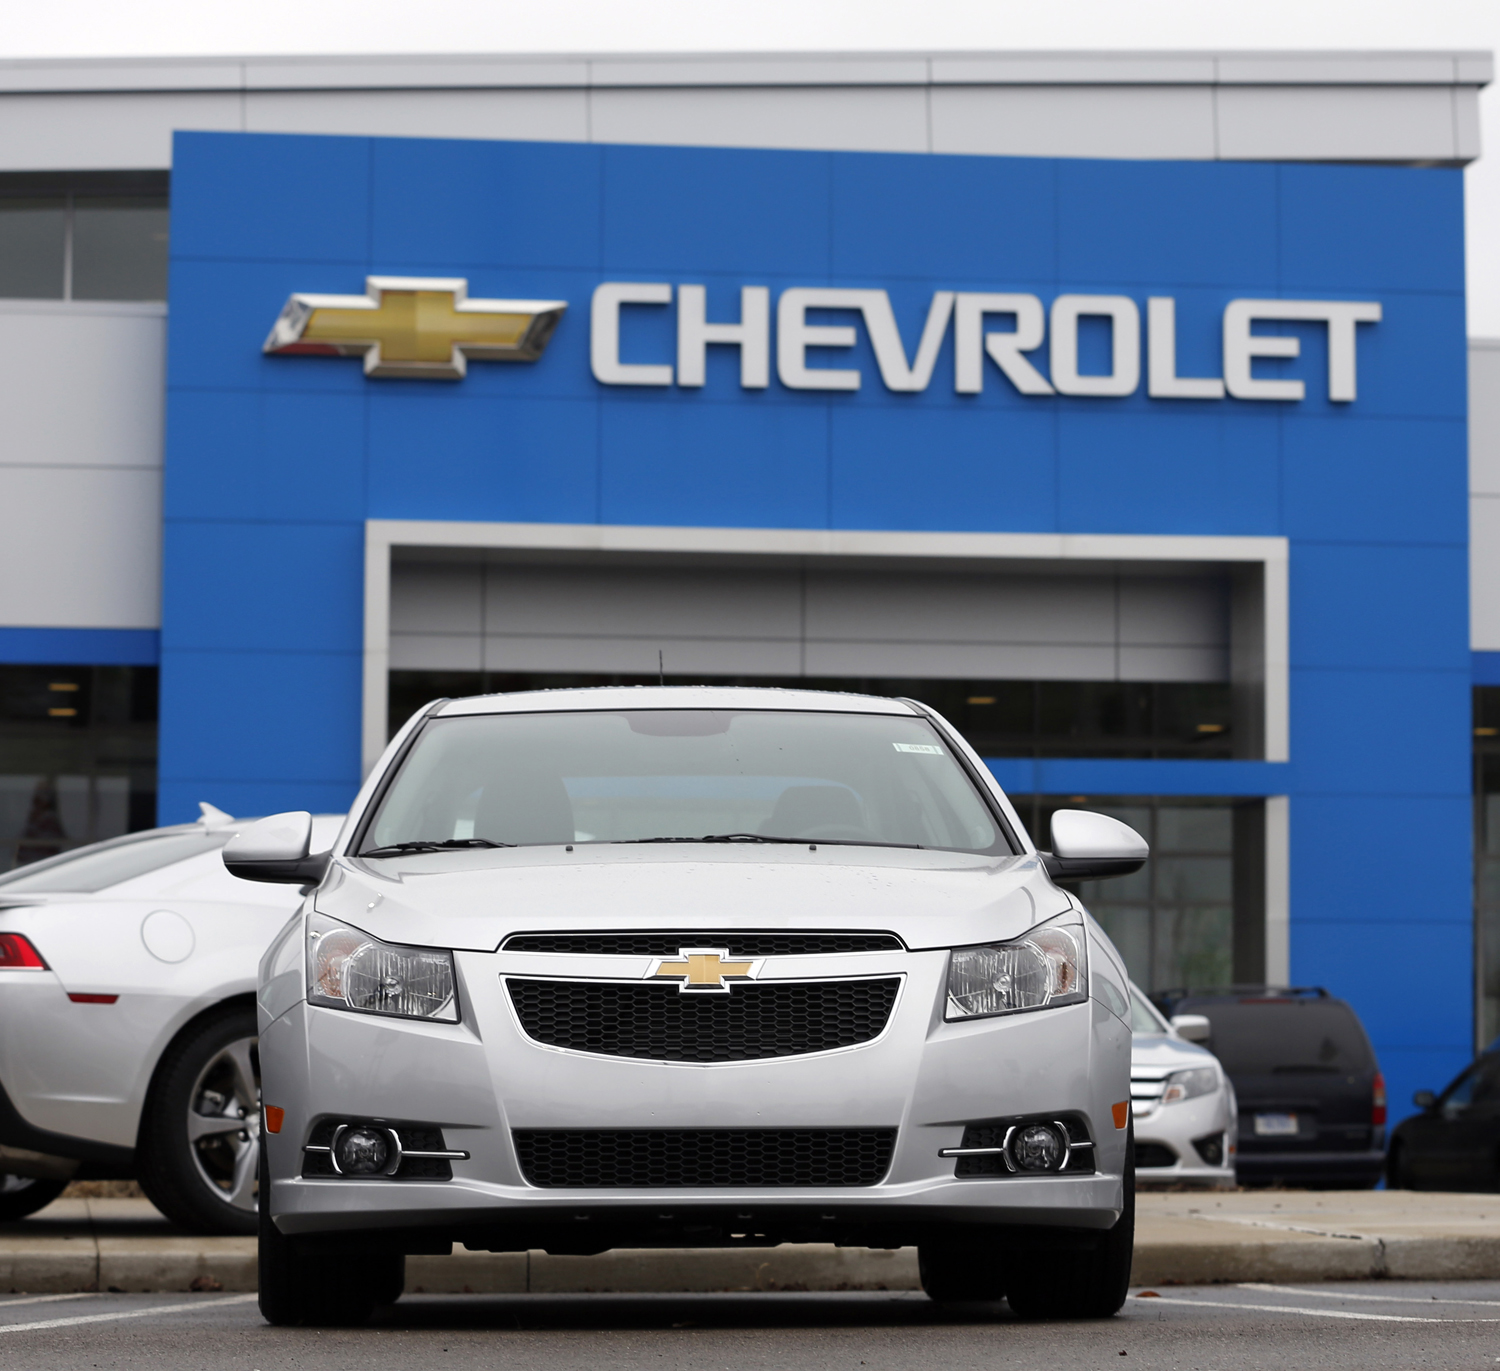 A General Motors Co. 2014 Chevrolet Cruze vehicle sits on the lot at a dealership in Southfield, Michigan, March 28, 2014.